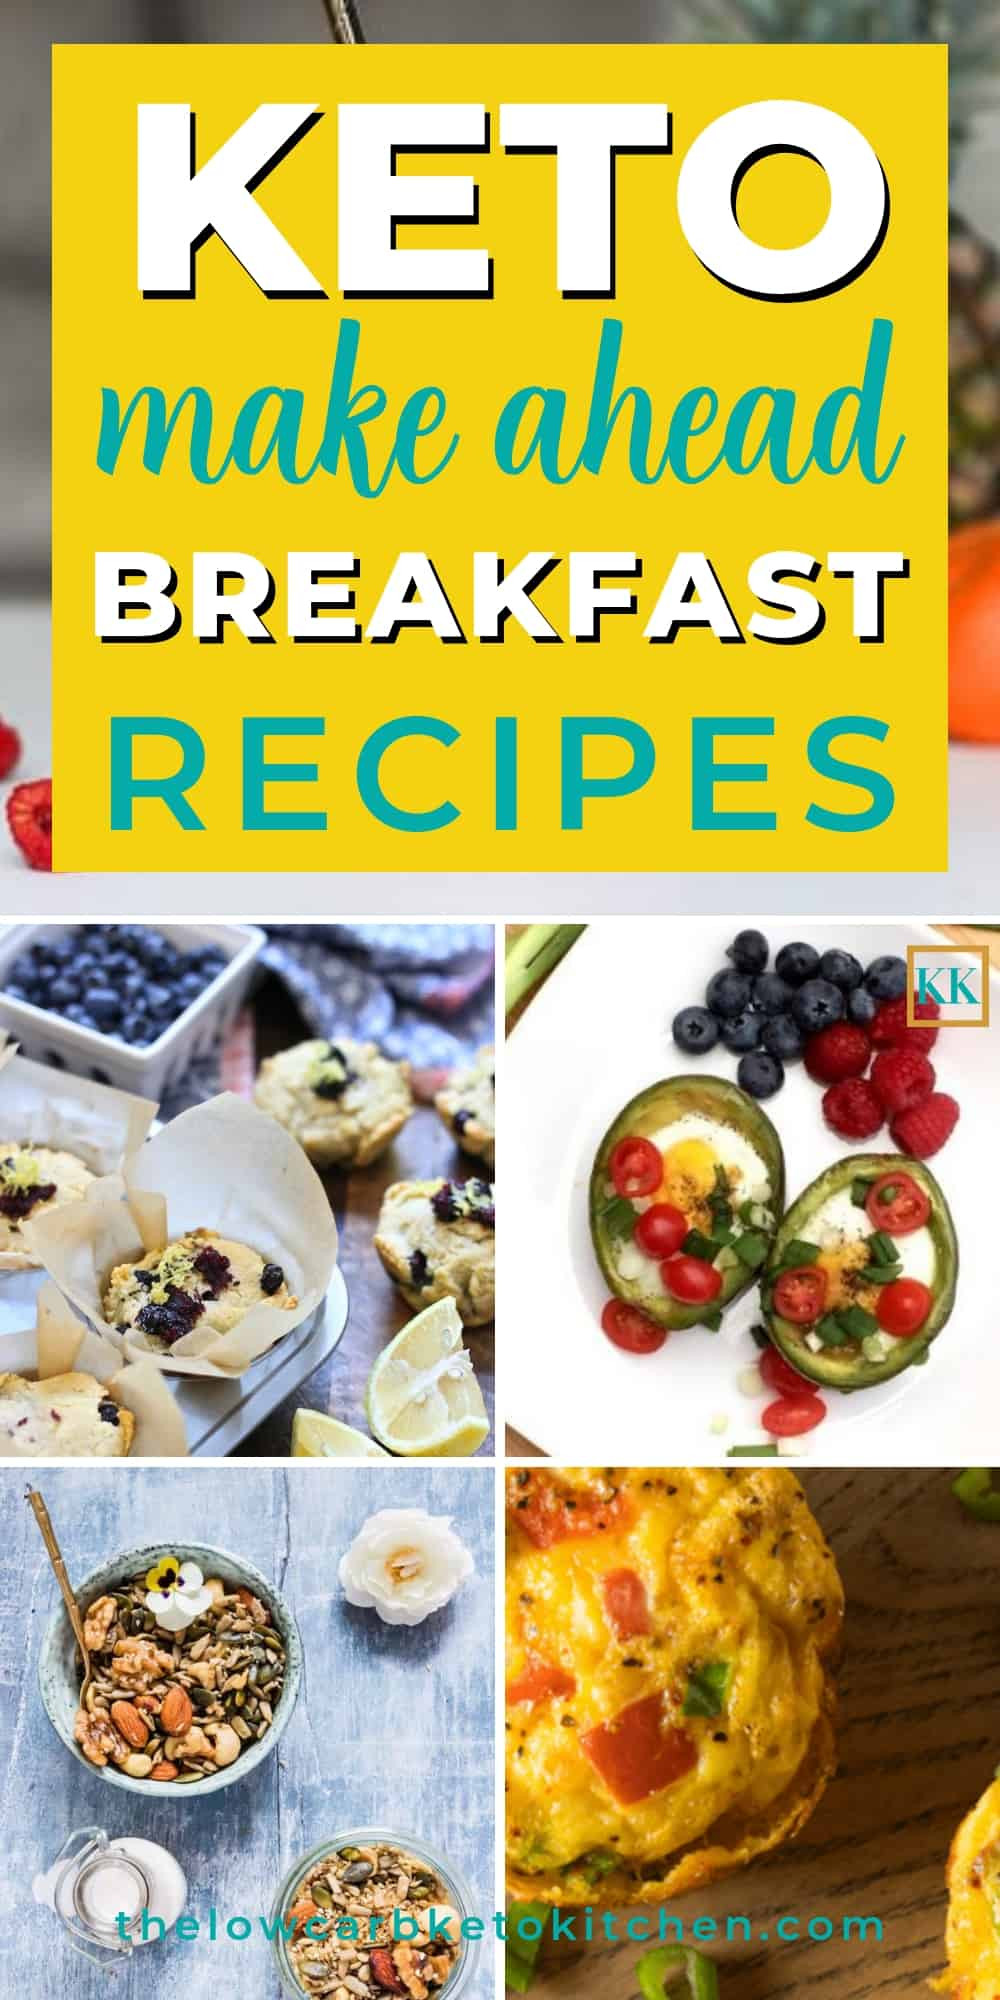 Keto Breakfast On The Go Make Ahead
 7 of the Best Make Ahead Keto Breakfast Recipes